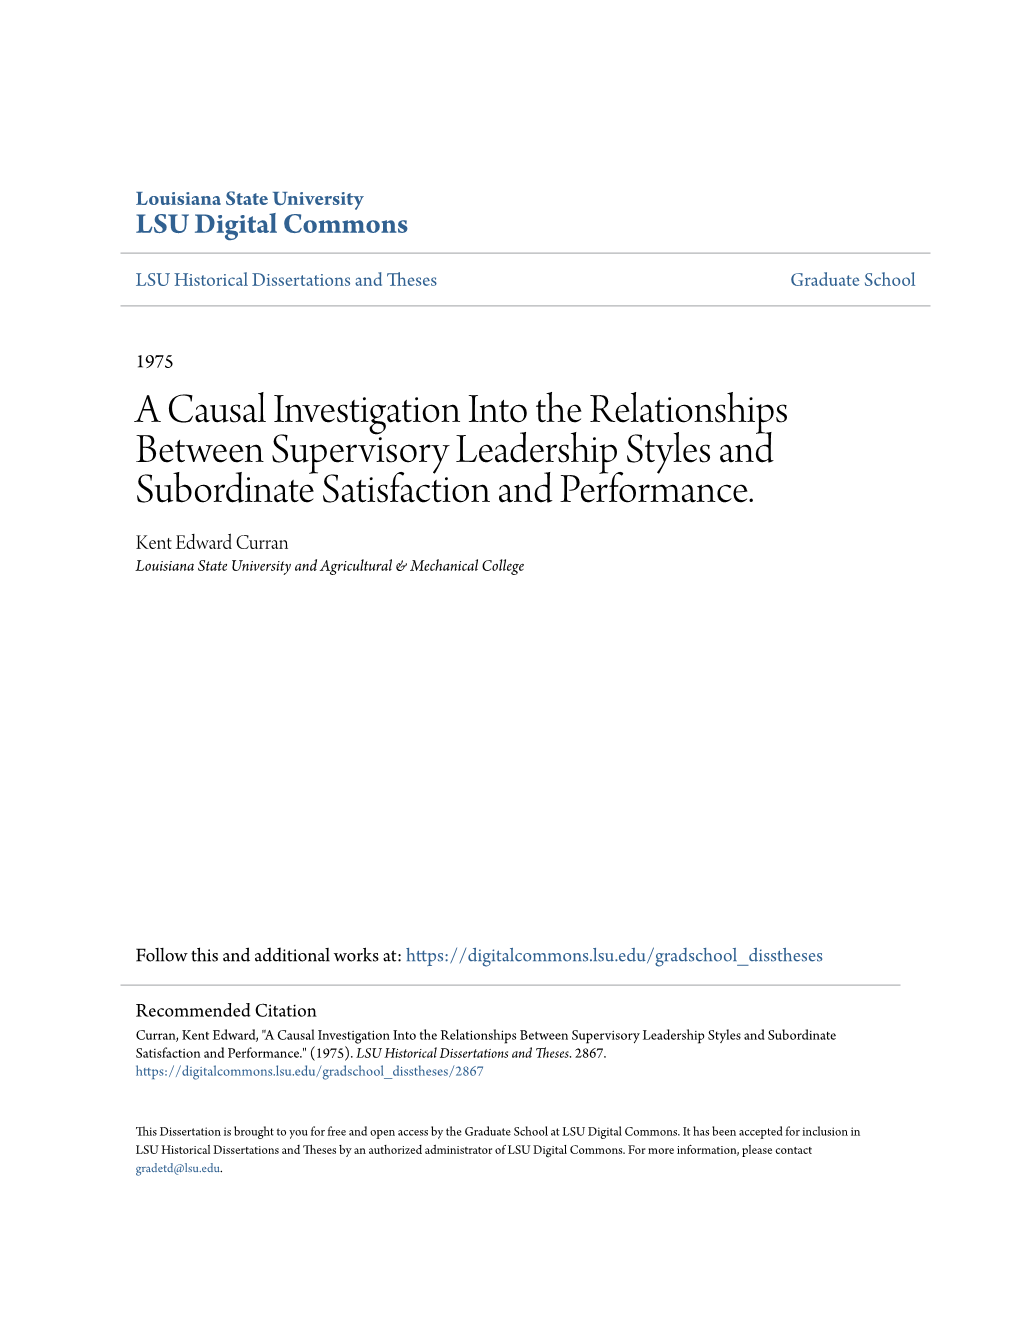 A Causal Investigation Into the Relationships Between Supervisory Leadership Styles and Subordinate Satisfaction and Performance